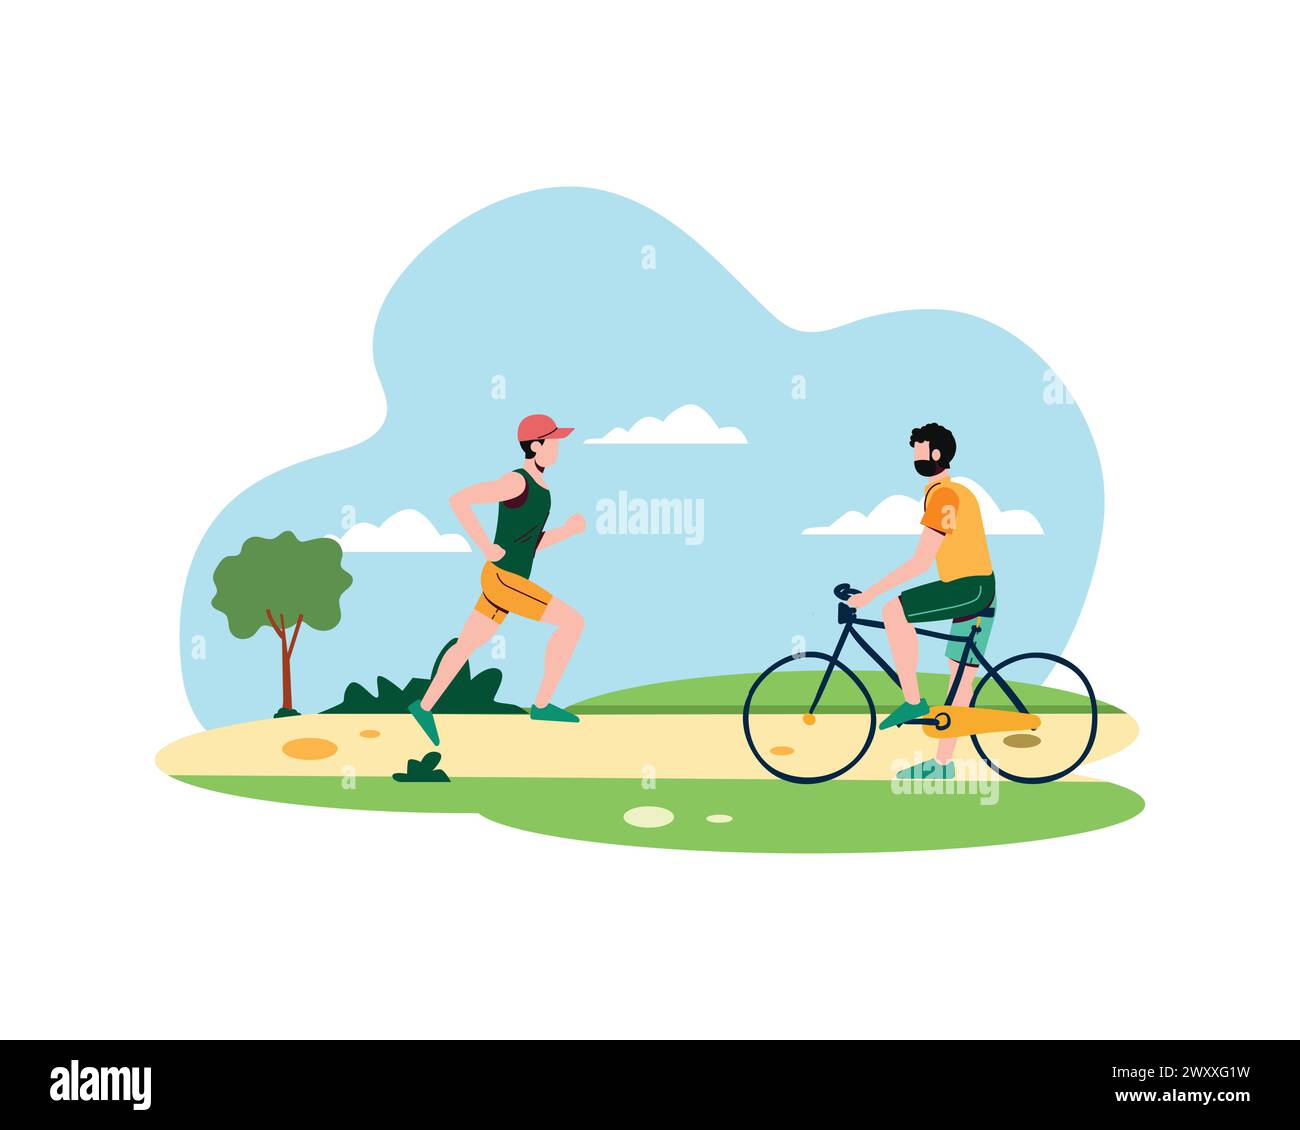 People jogging and ride a bicycle in the park scene. Healthy lifestyle concept. Sport and leisure activities in public space vector illustration desig Stock Vector